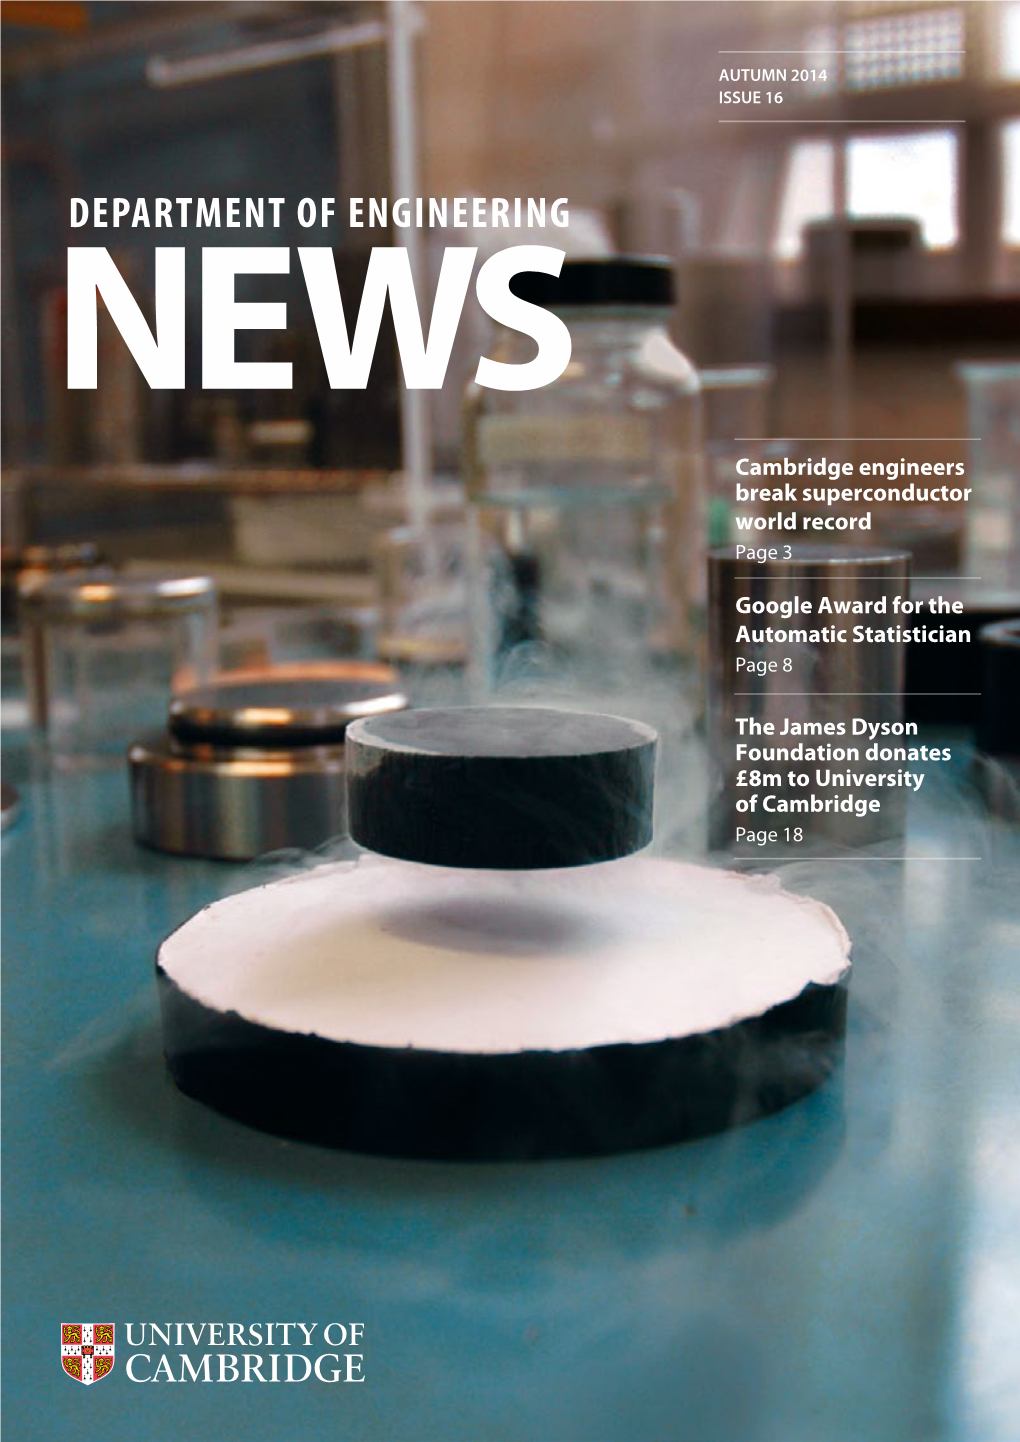 DEPARTMENT of ENGINEERING NEWS Cambridge Engineers Break Superconductor World Record Page 3